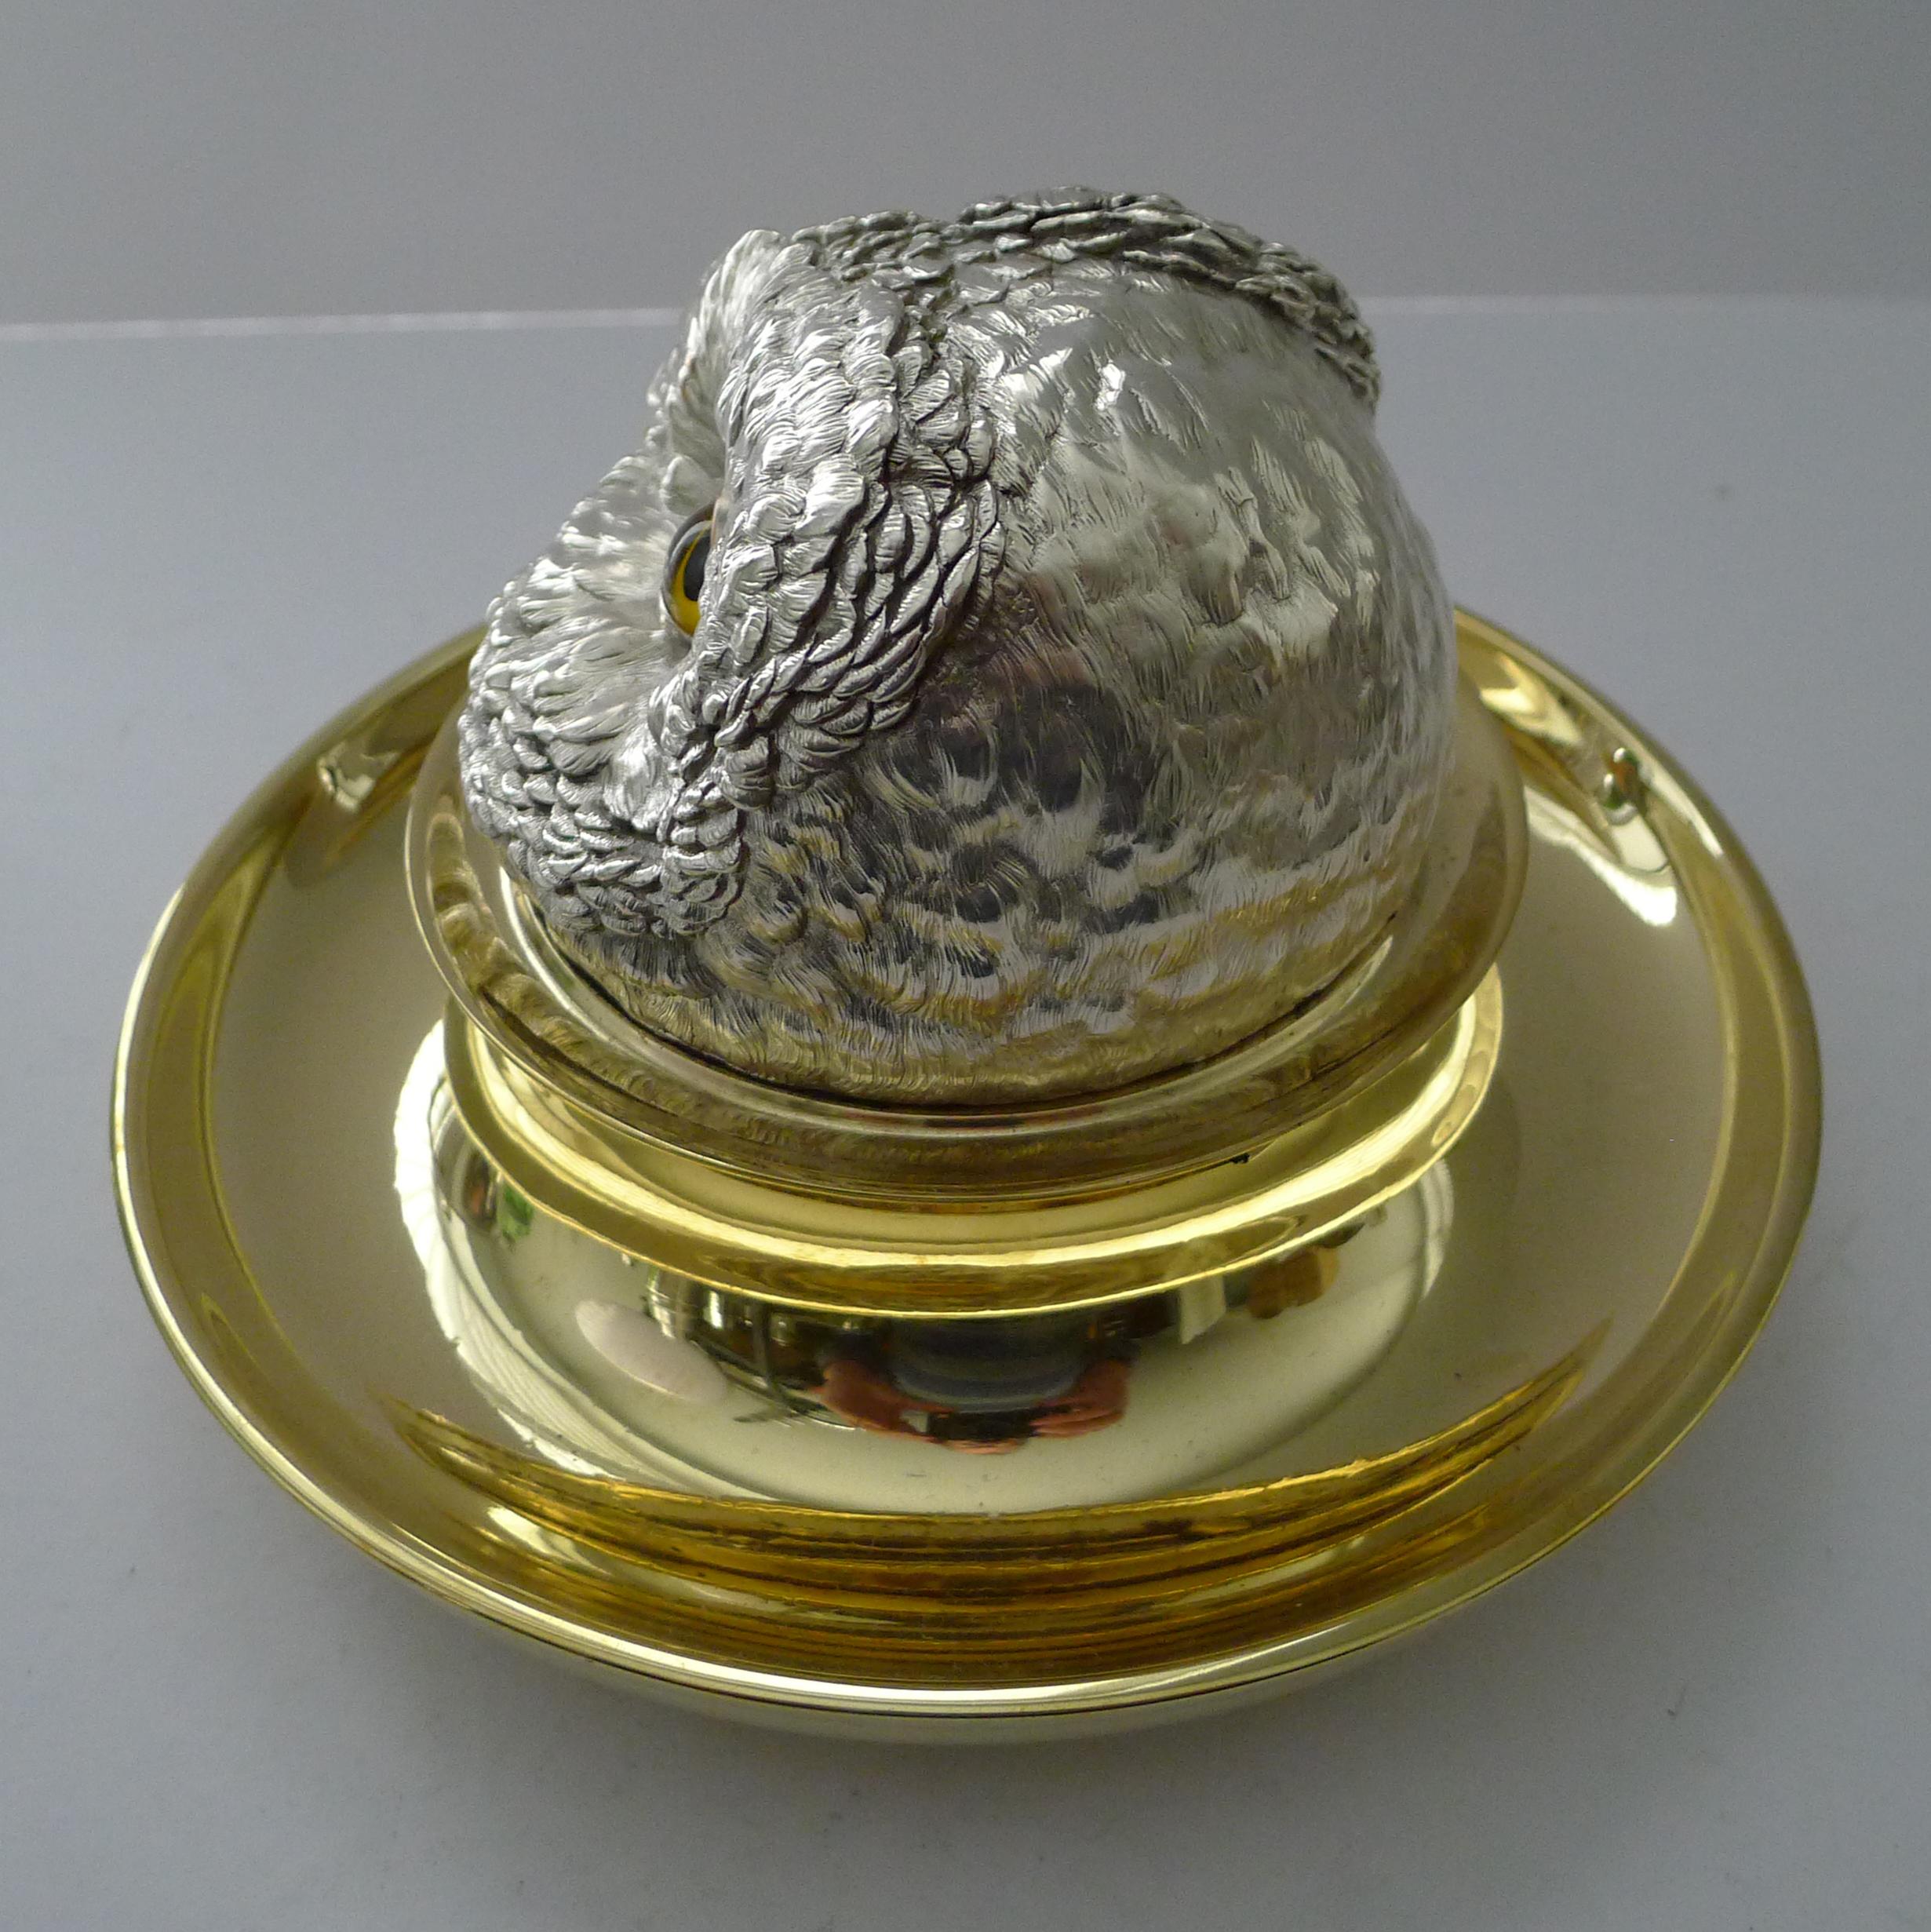 Silver Plate Rare Mammoth English Victorian Novelty Inkwell, Owl with Glass Eyes C.1880 For Sale